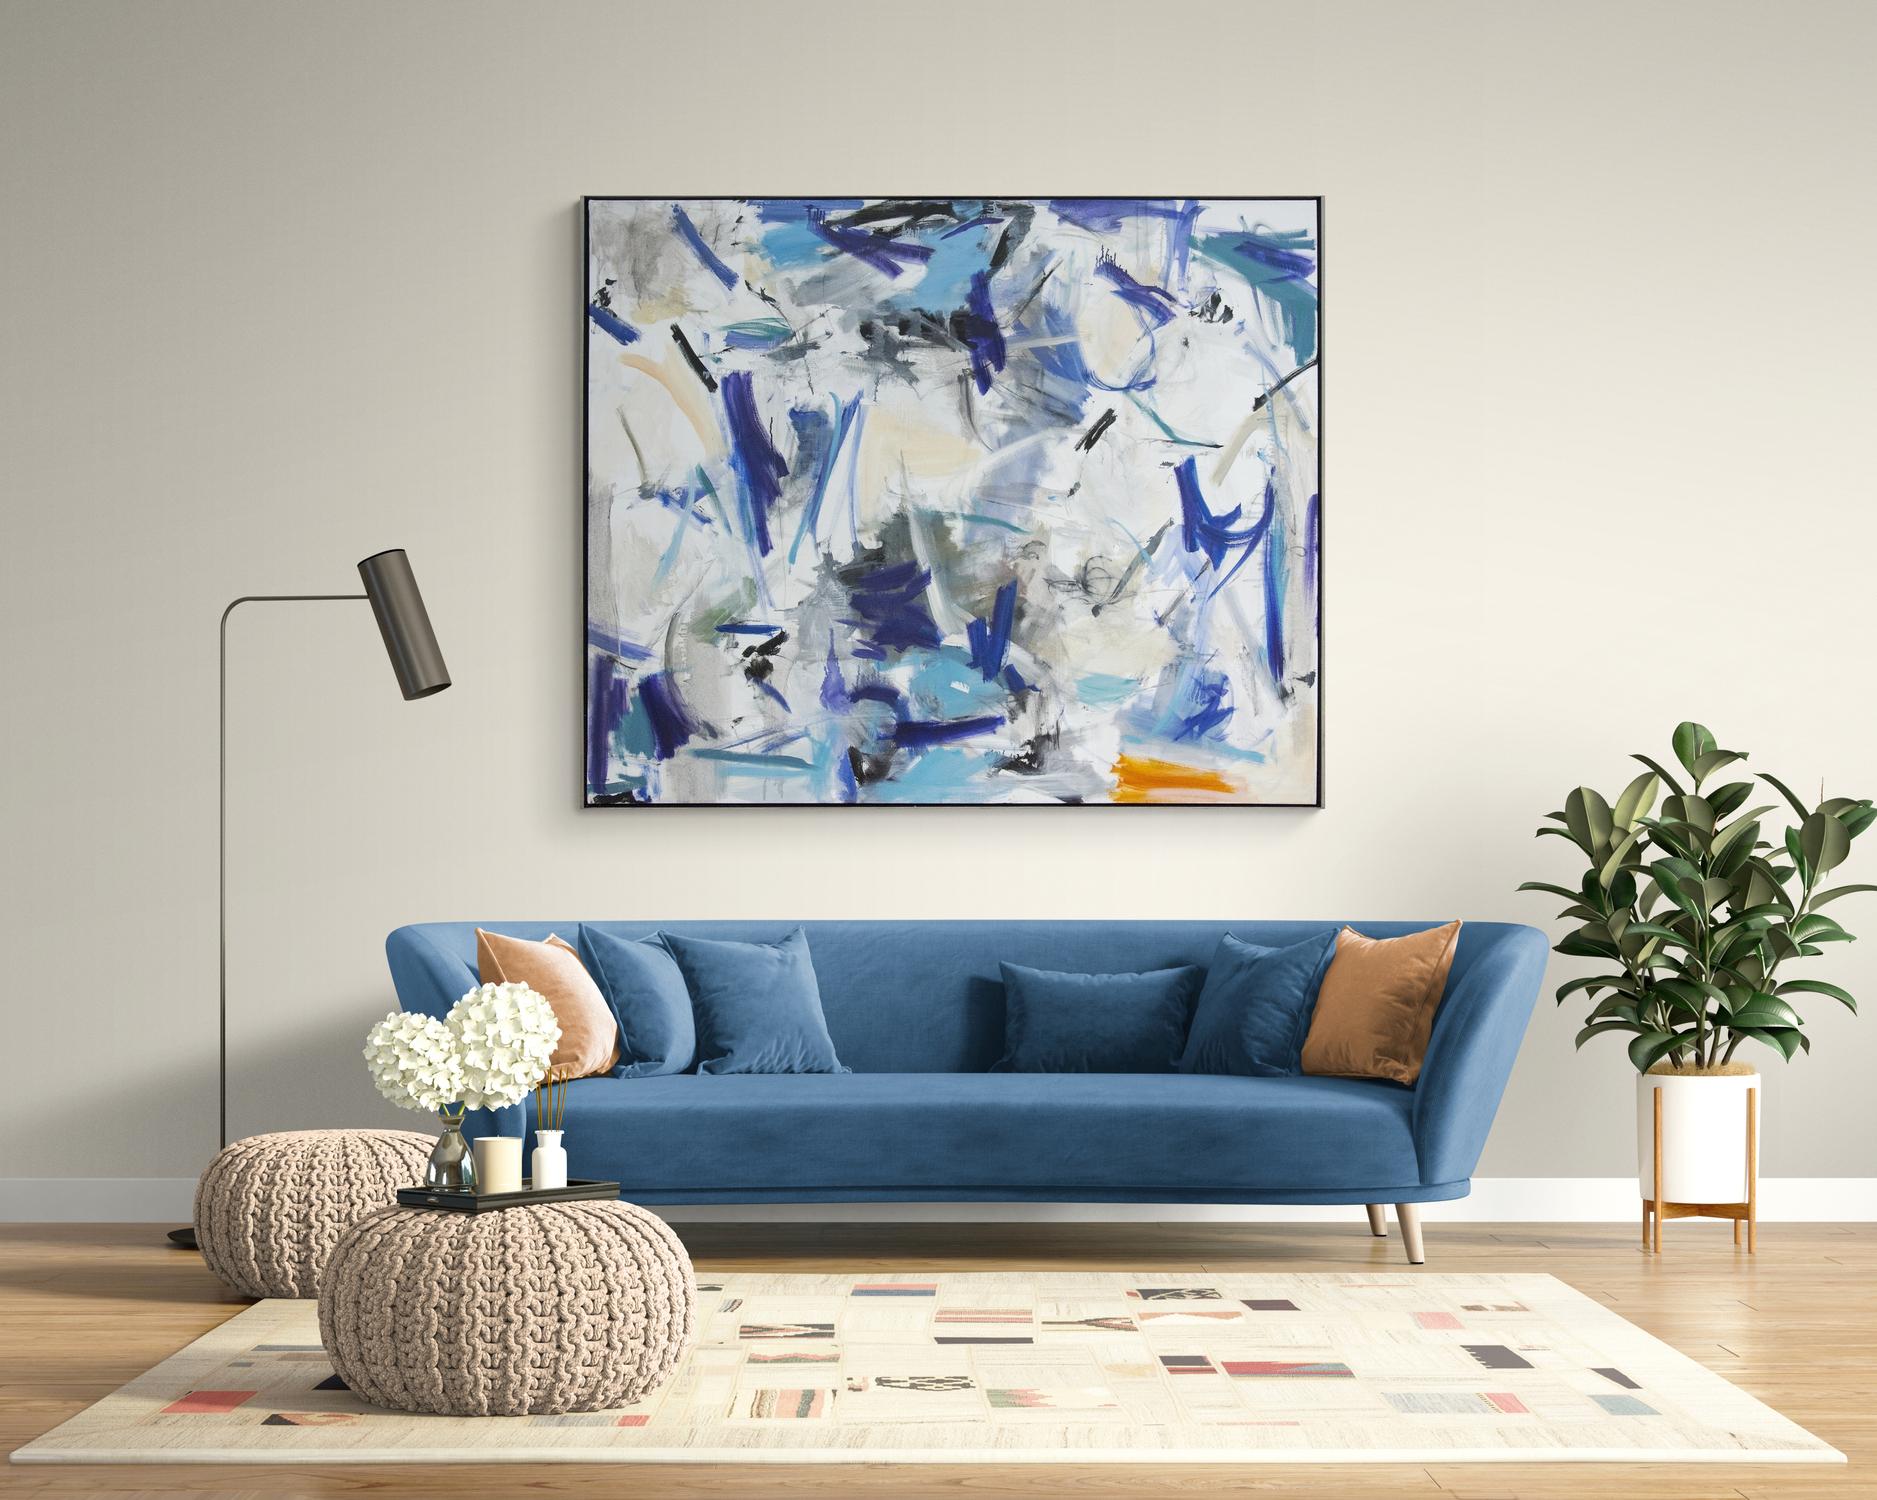 Curated indigo brushstrokes are caught in an eddy of cloud blue, silver and mauve in this dynamic canvas by Scott Pattinson. A passage of orange at the lower right adds a vibrant note to the active composition. Pattinson’s thematically organized oil